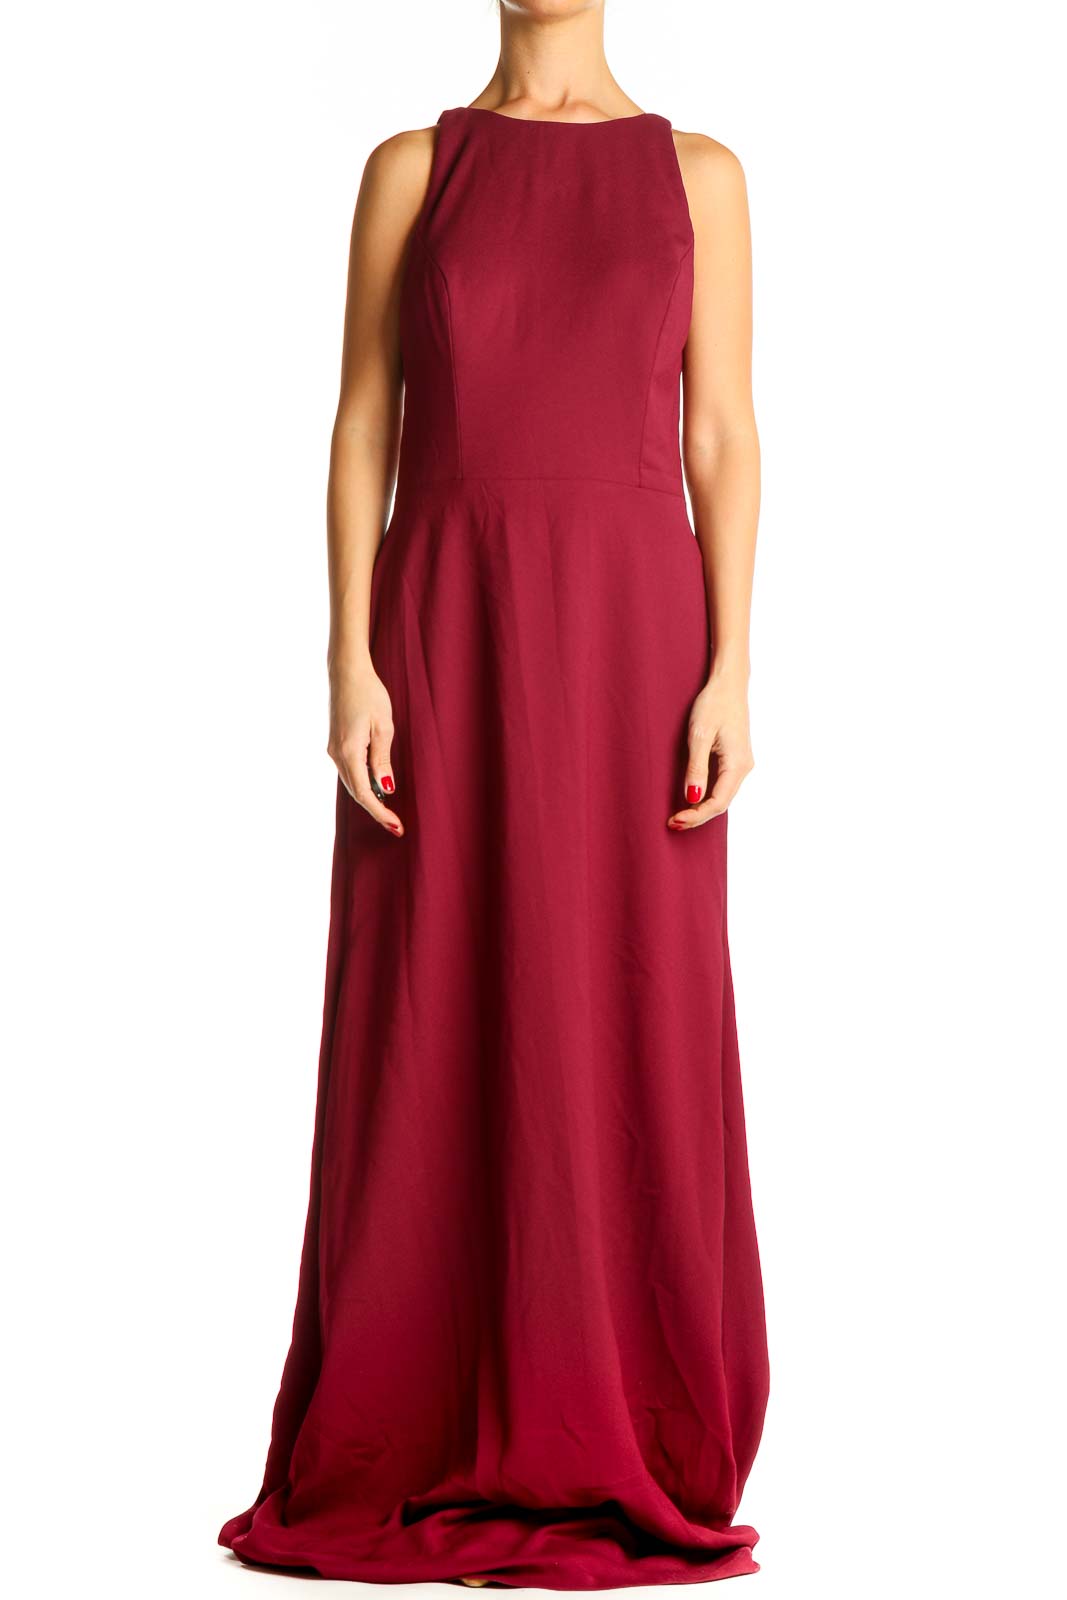 Red Classic Formal Column Dress Front